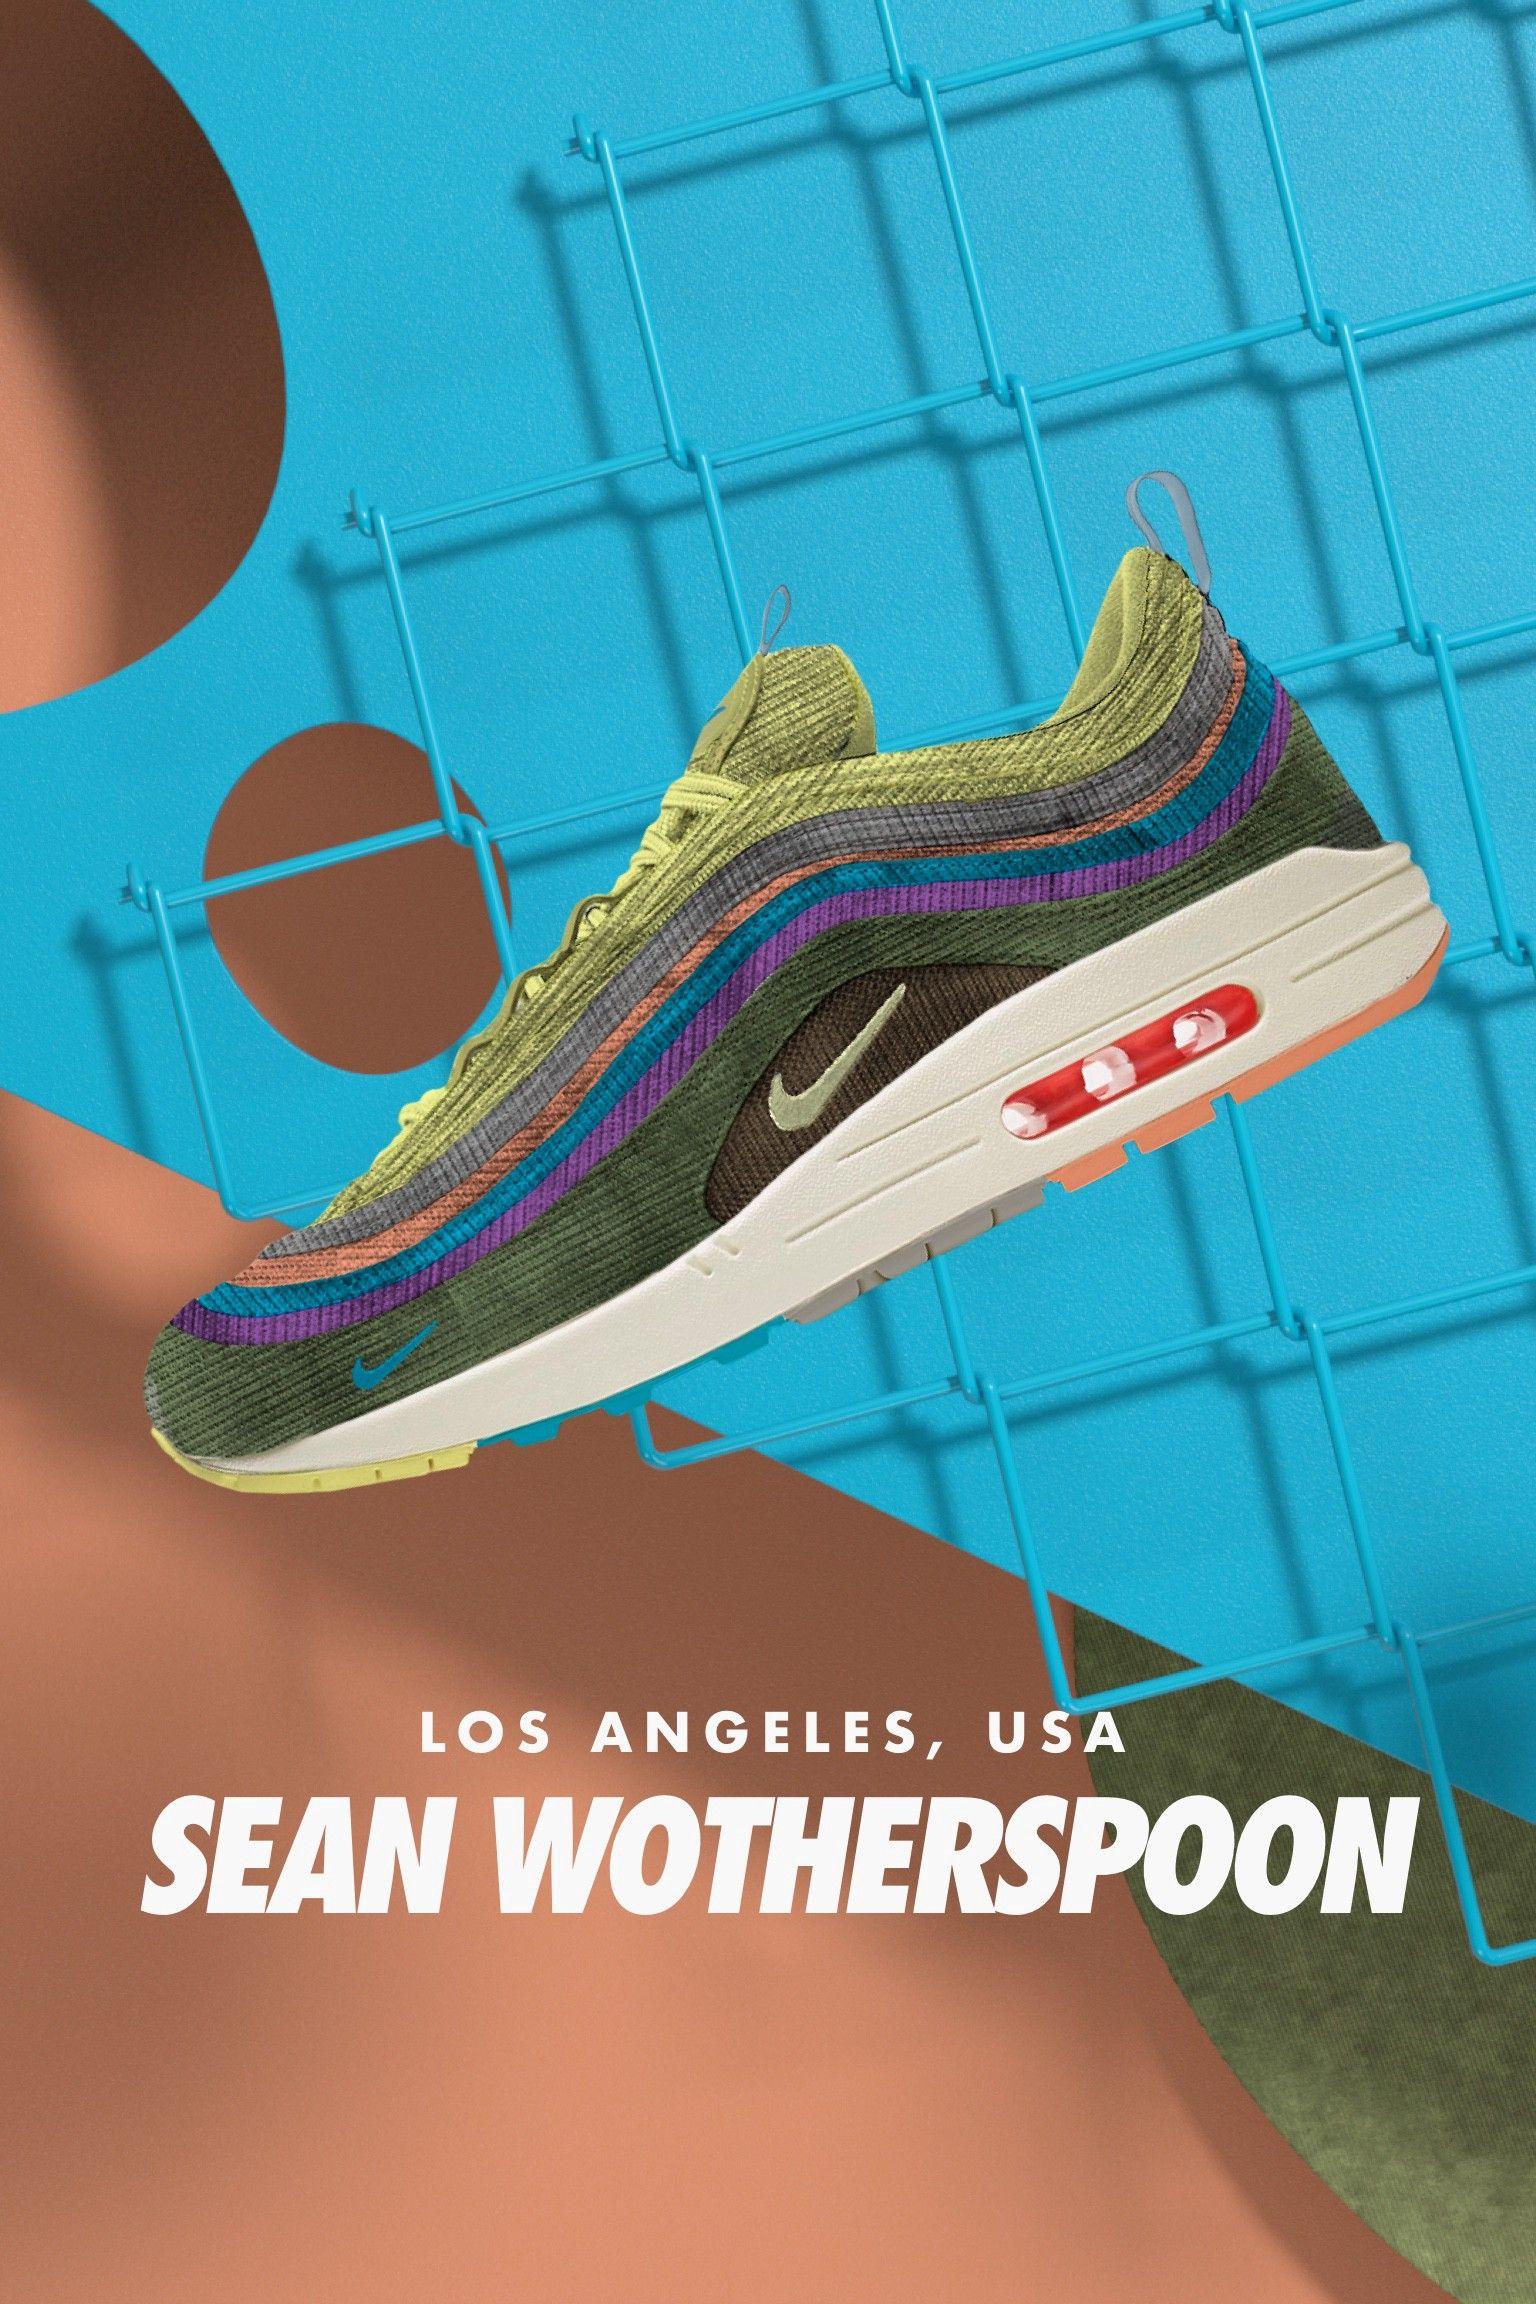 Fade Nike Logo - In Depth Sneaker Review: Nike Air Max 1 97 “Sean Wotherspoon”